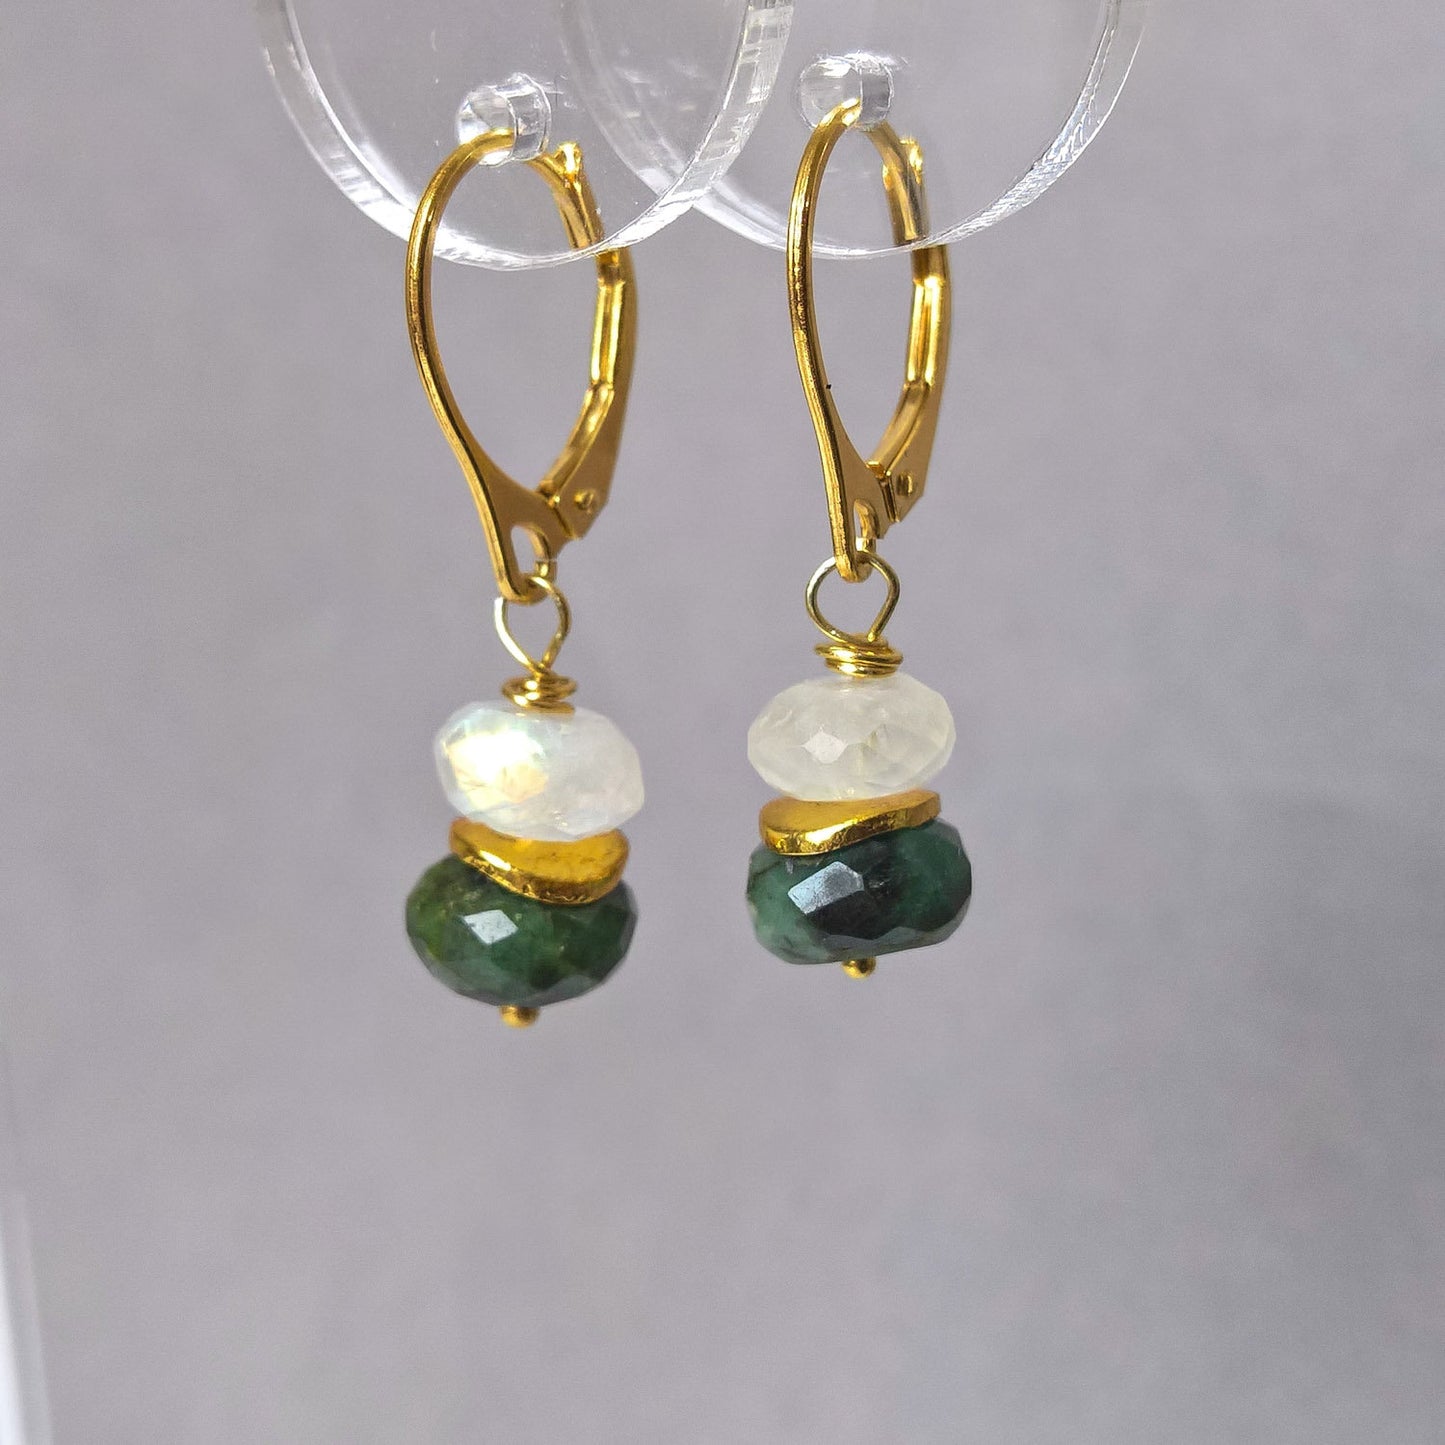 Raw emerald and moonstone drop earrings in gold vermeil silver